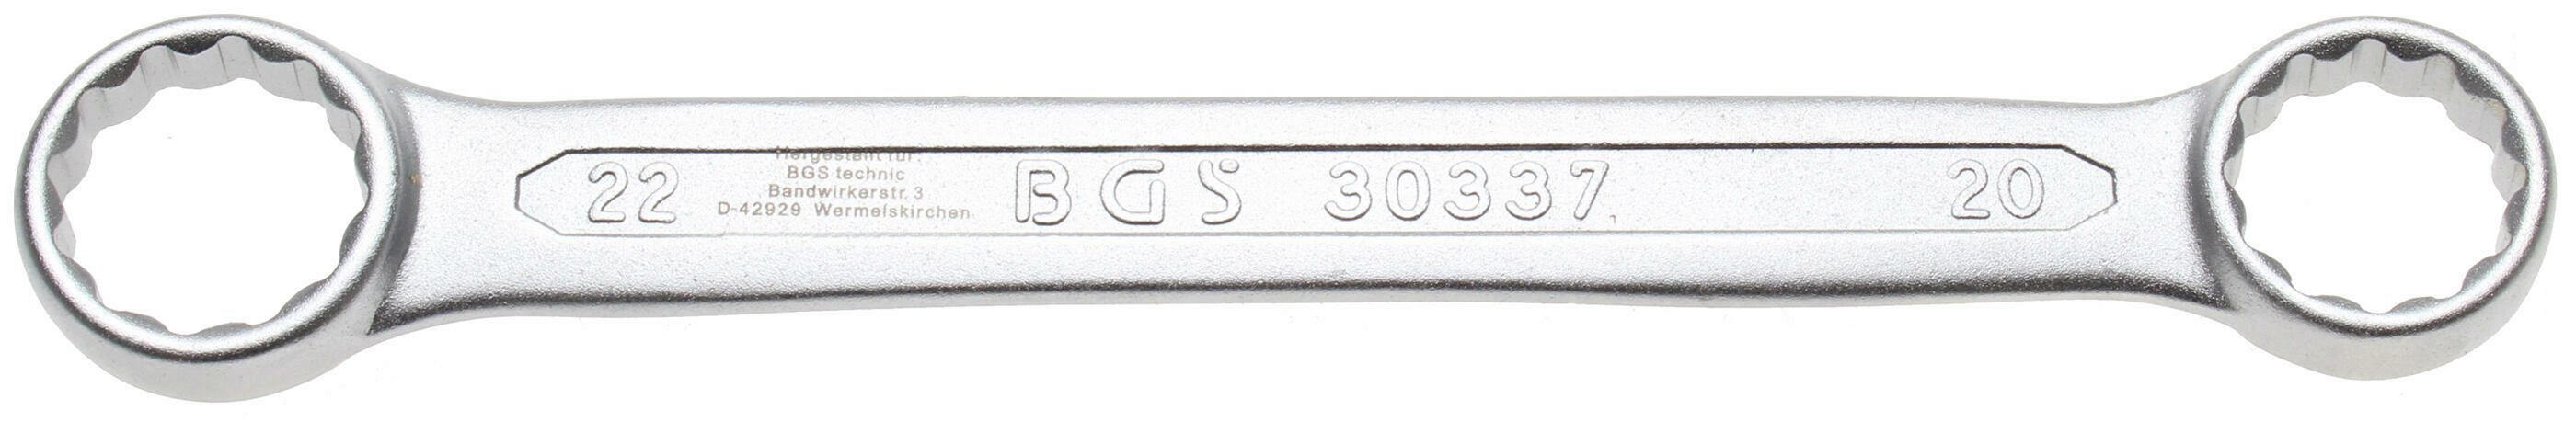 BGS Double Ring Spanner